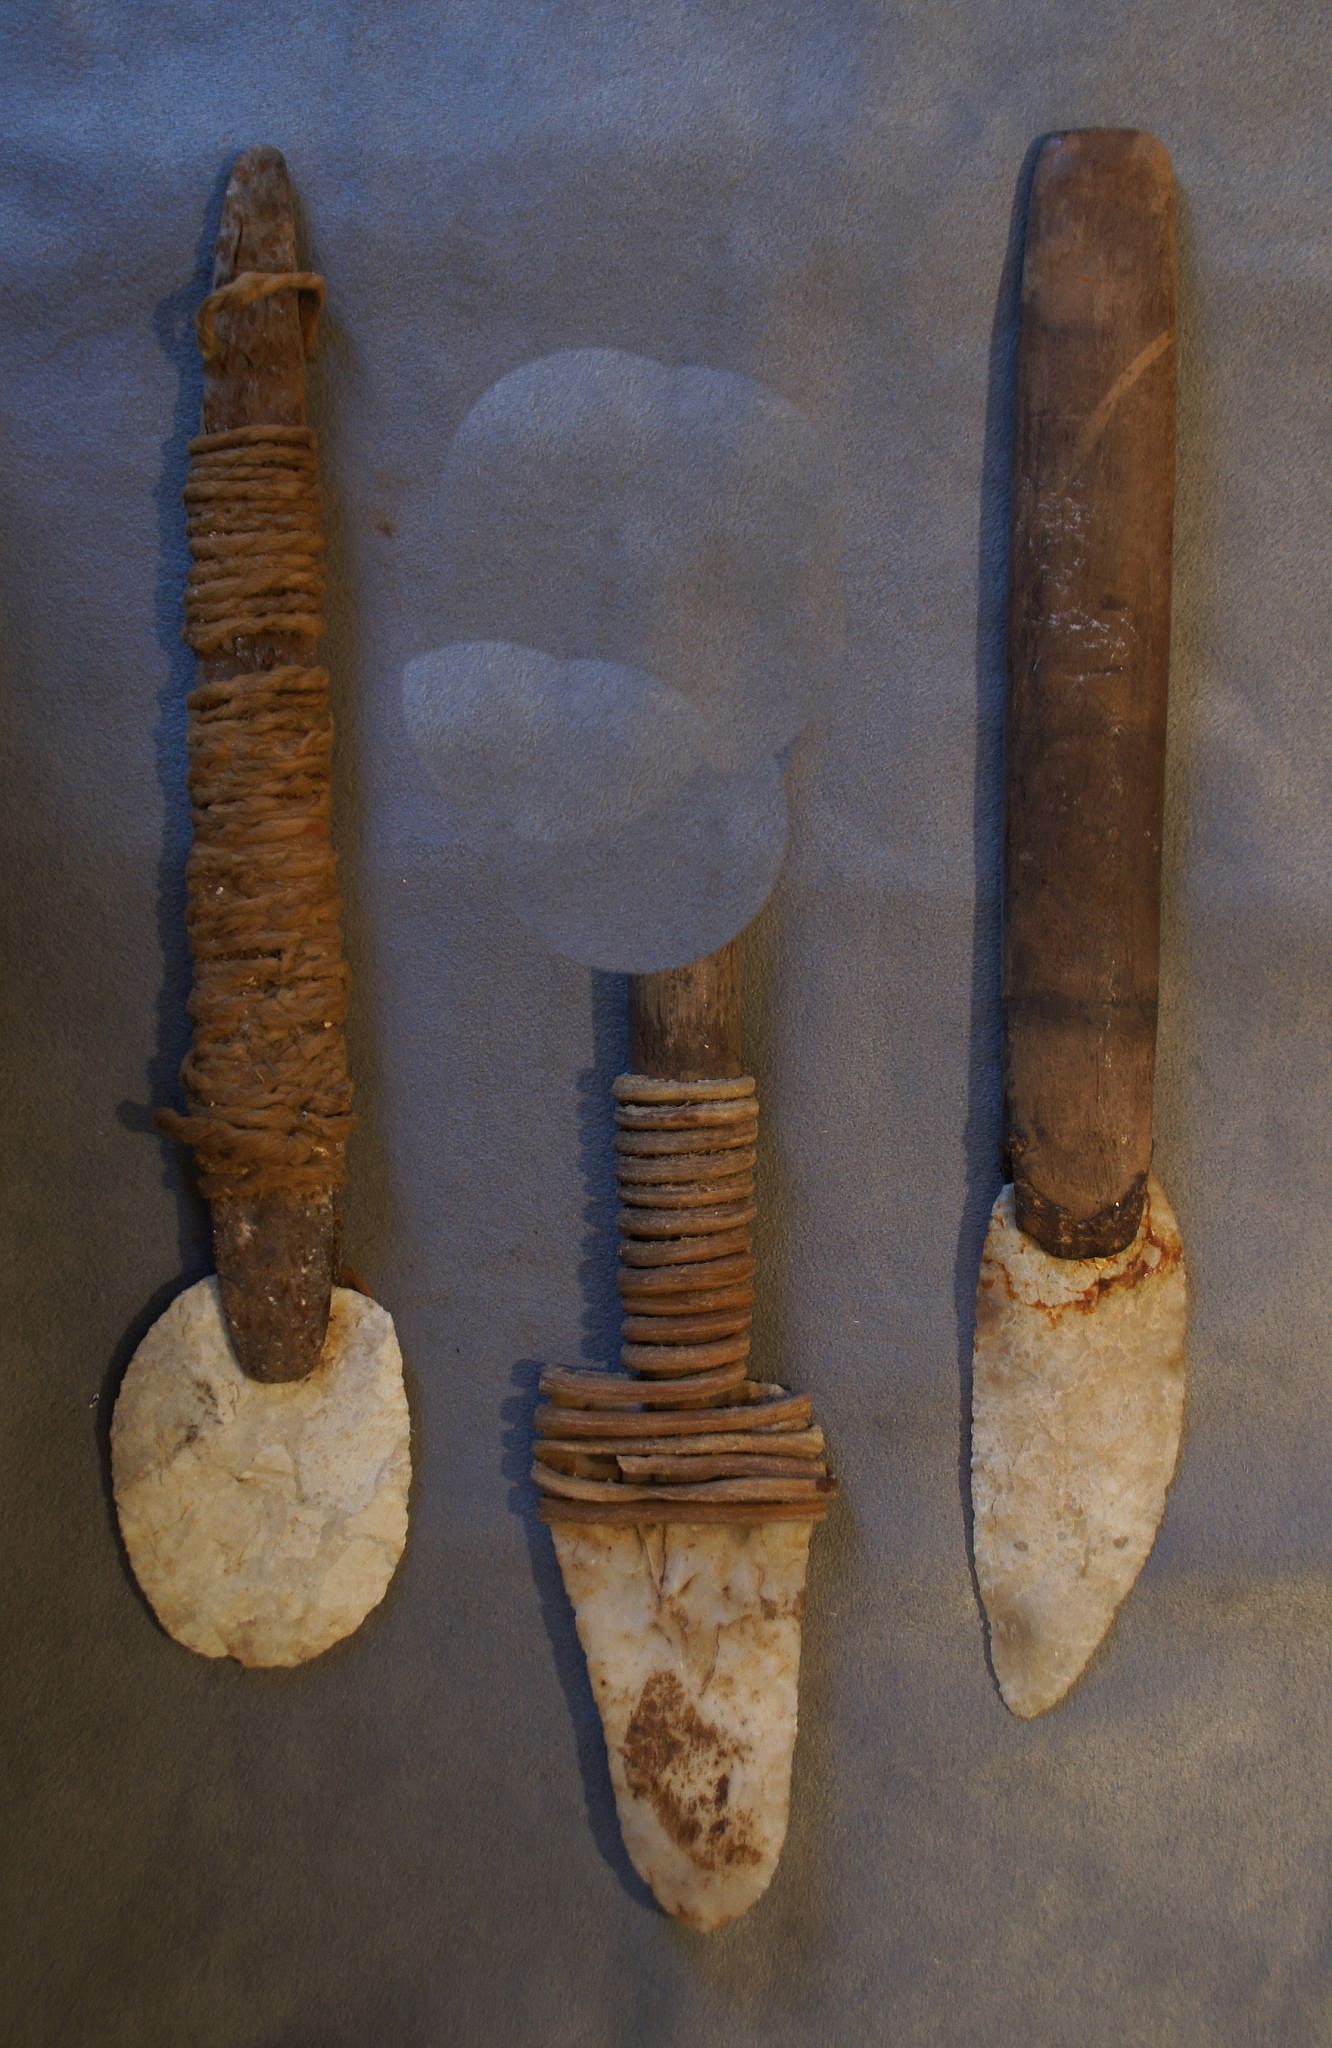 Chile, Three Claming Tools With Napped Broad Points
These tools were used to find and pry open clams and mussels on the sandy shoreline.  Hemp or leather secured the points to slits in the wooden shafts.  Traces of glue indicates that they used tree resin to secure the points in the shafts.
Media: Wood
Dimensions: Length: 9" each.
n6030